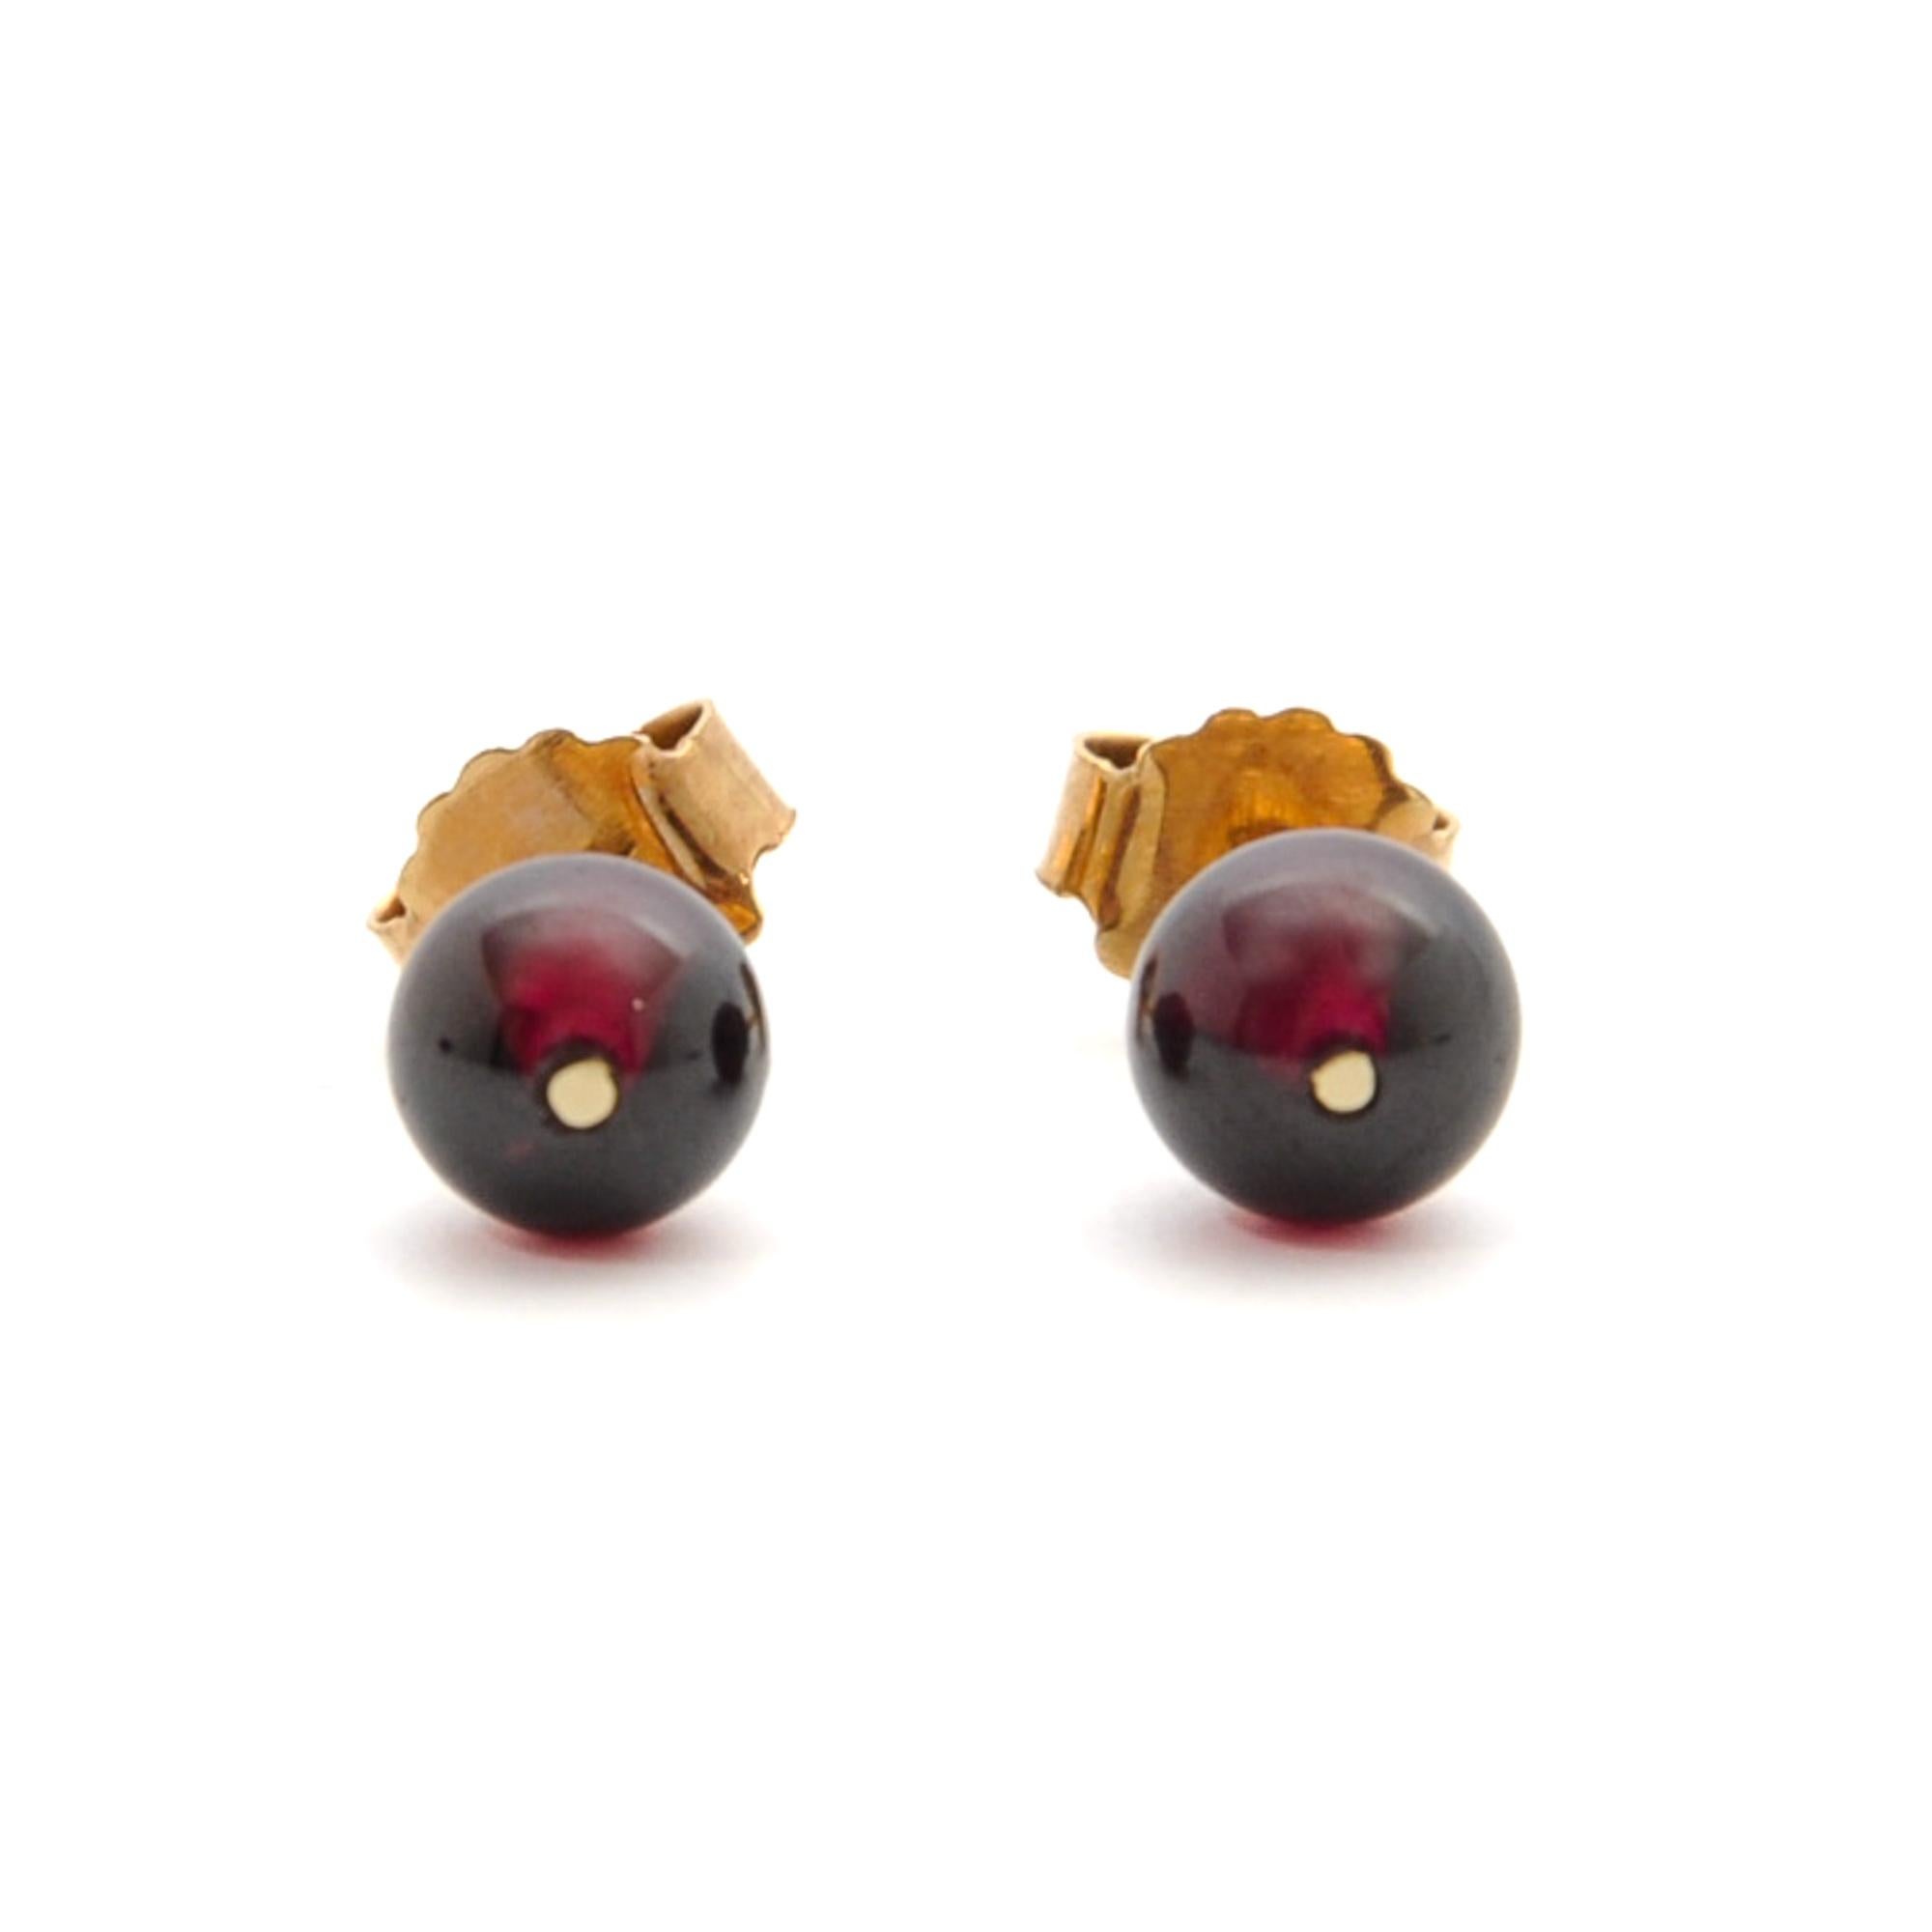 A gorgeous pair of natural round bead red garnet stud earrings. The smooth round garnet is attached to a 14 karat gold setting on the back, which has a beautiful round cannelure ornament. The garnet stones have a nice deep red color and the studs